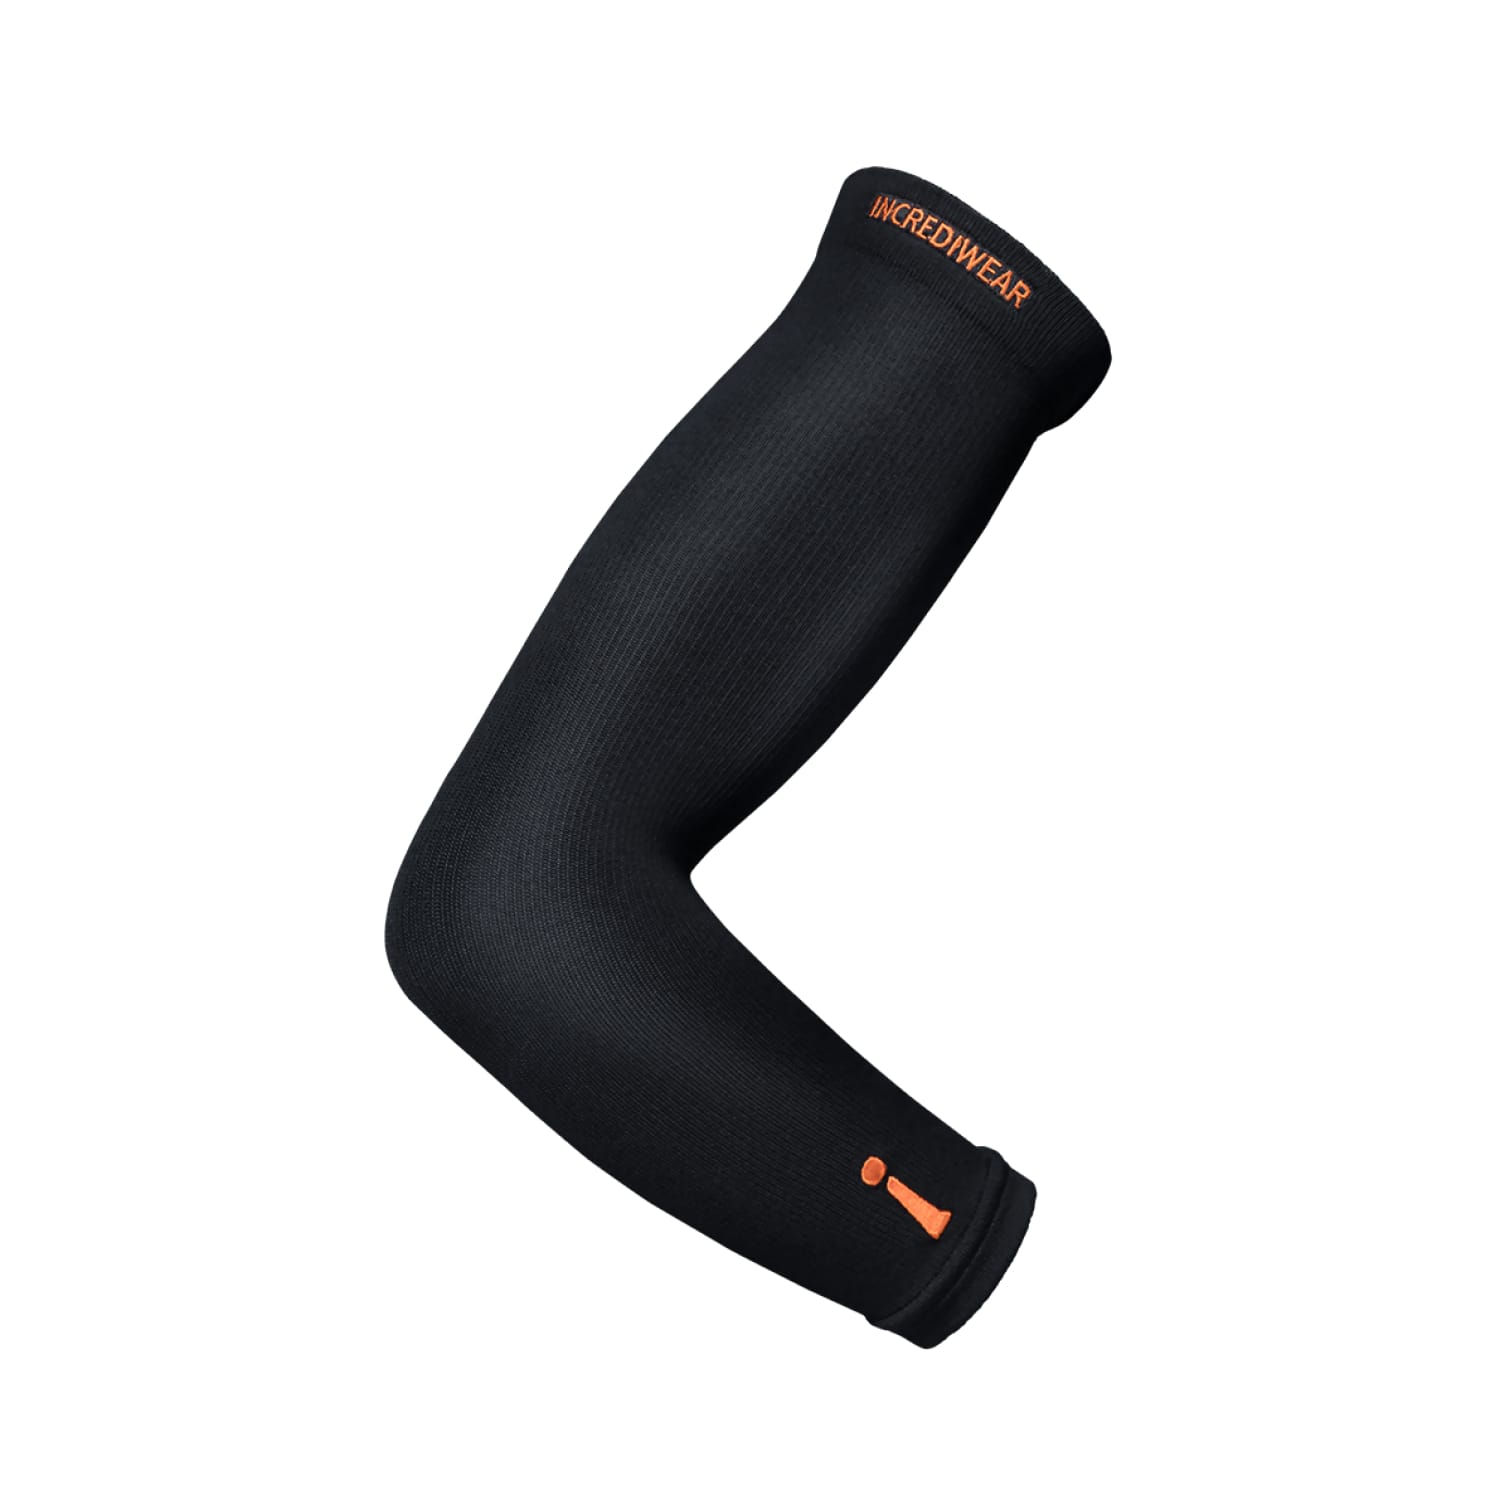 Incrediwear Arm Sleeve | Relieve Joint Pain black side